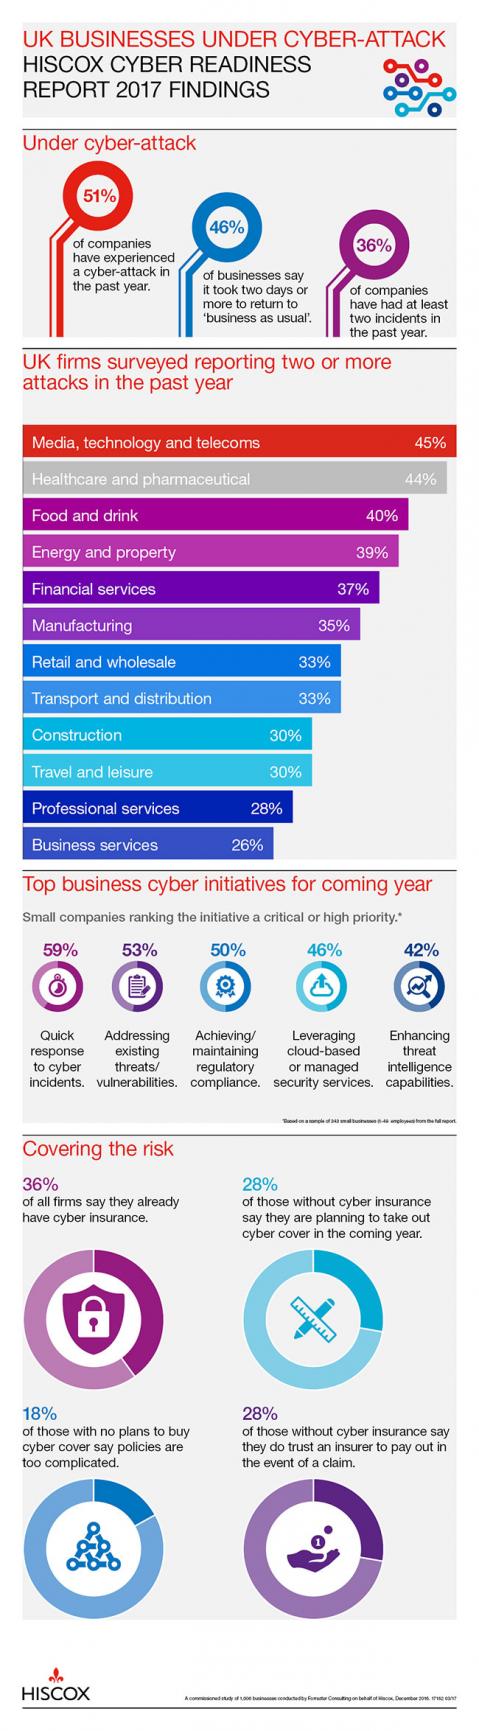 Cyber readiness infographic